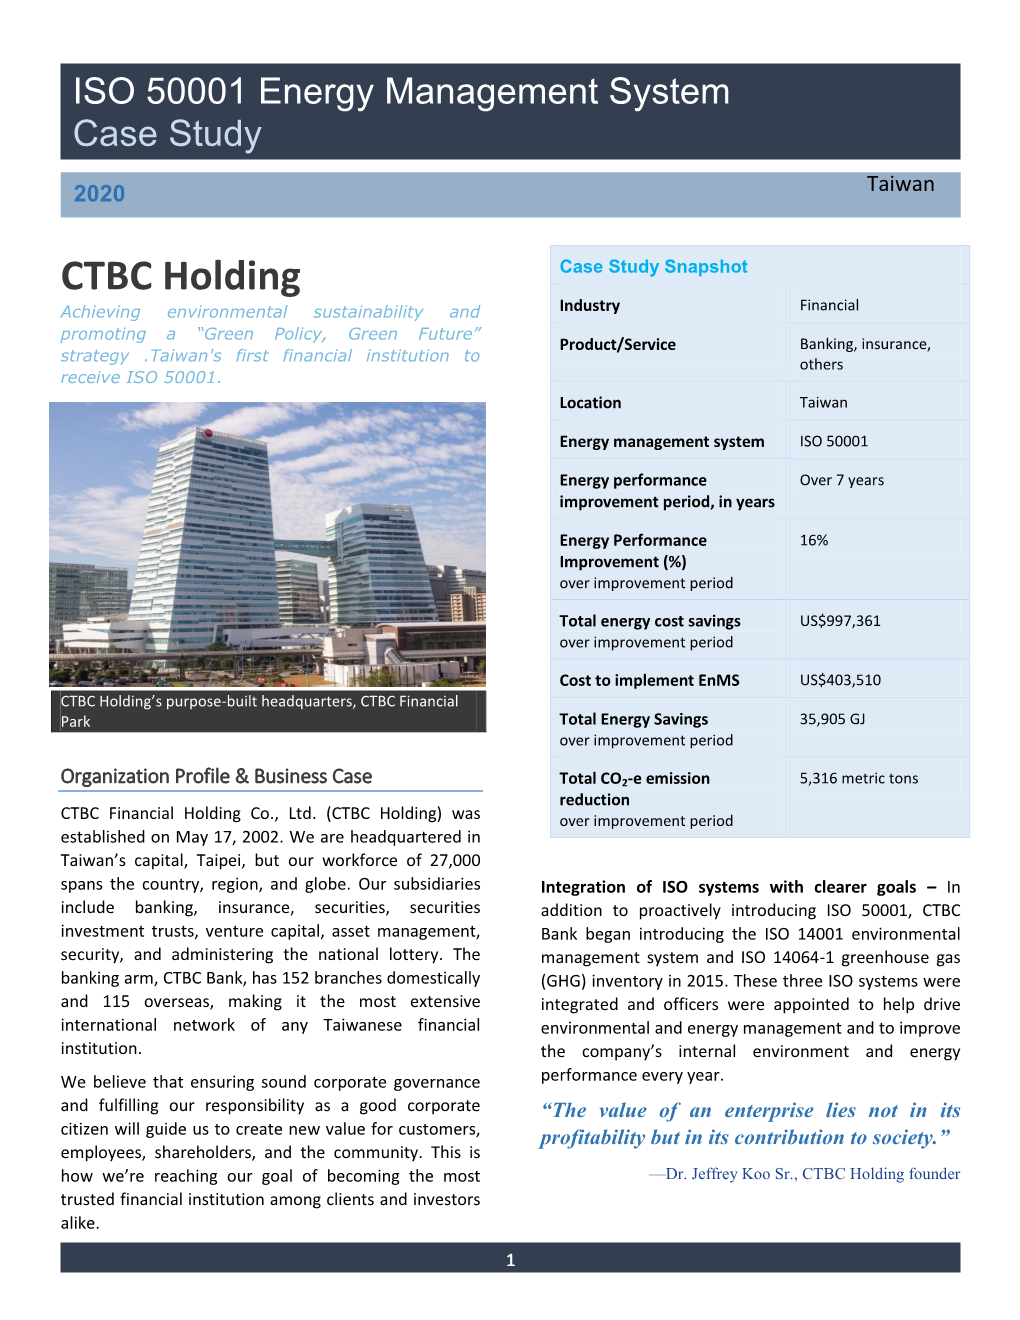 CTBC Financial Holding Co., Ltd. (CTBC Holding) Was Over Improvement Period Established on May 17, 2002